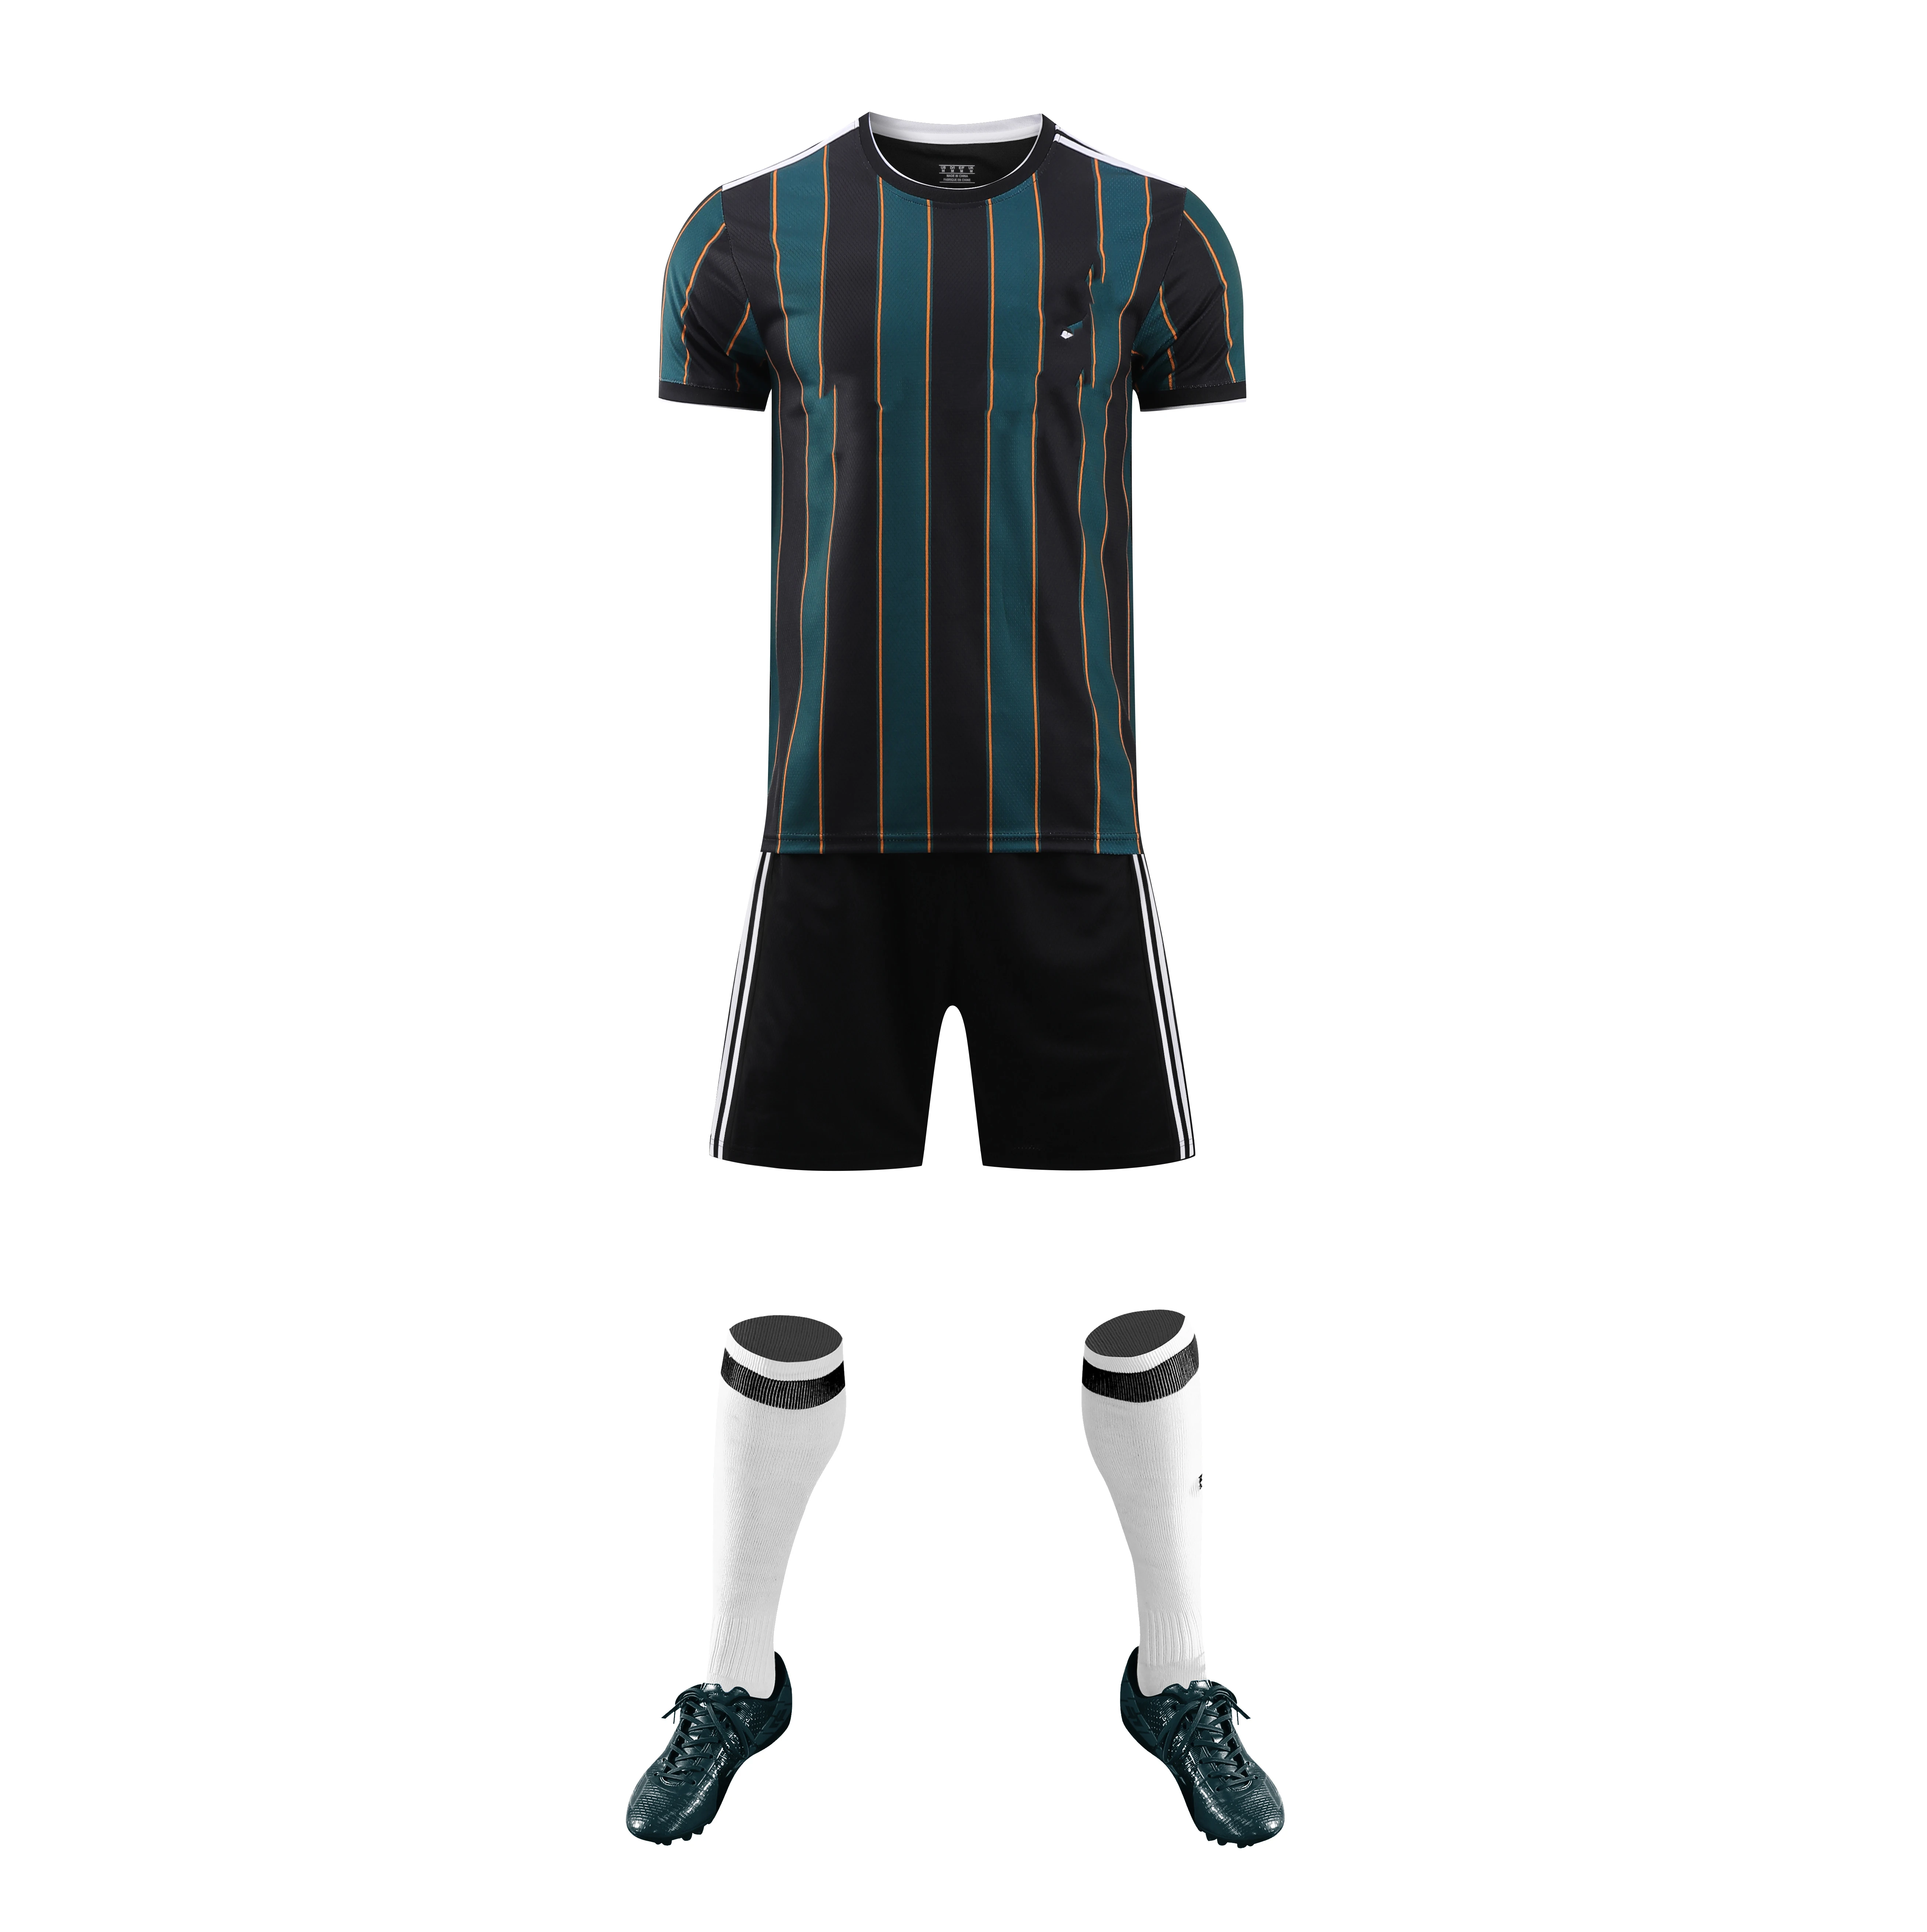 

Sublimation customized breathable football uniforms stretch quick dry soccer jersey wear, Picture showed